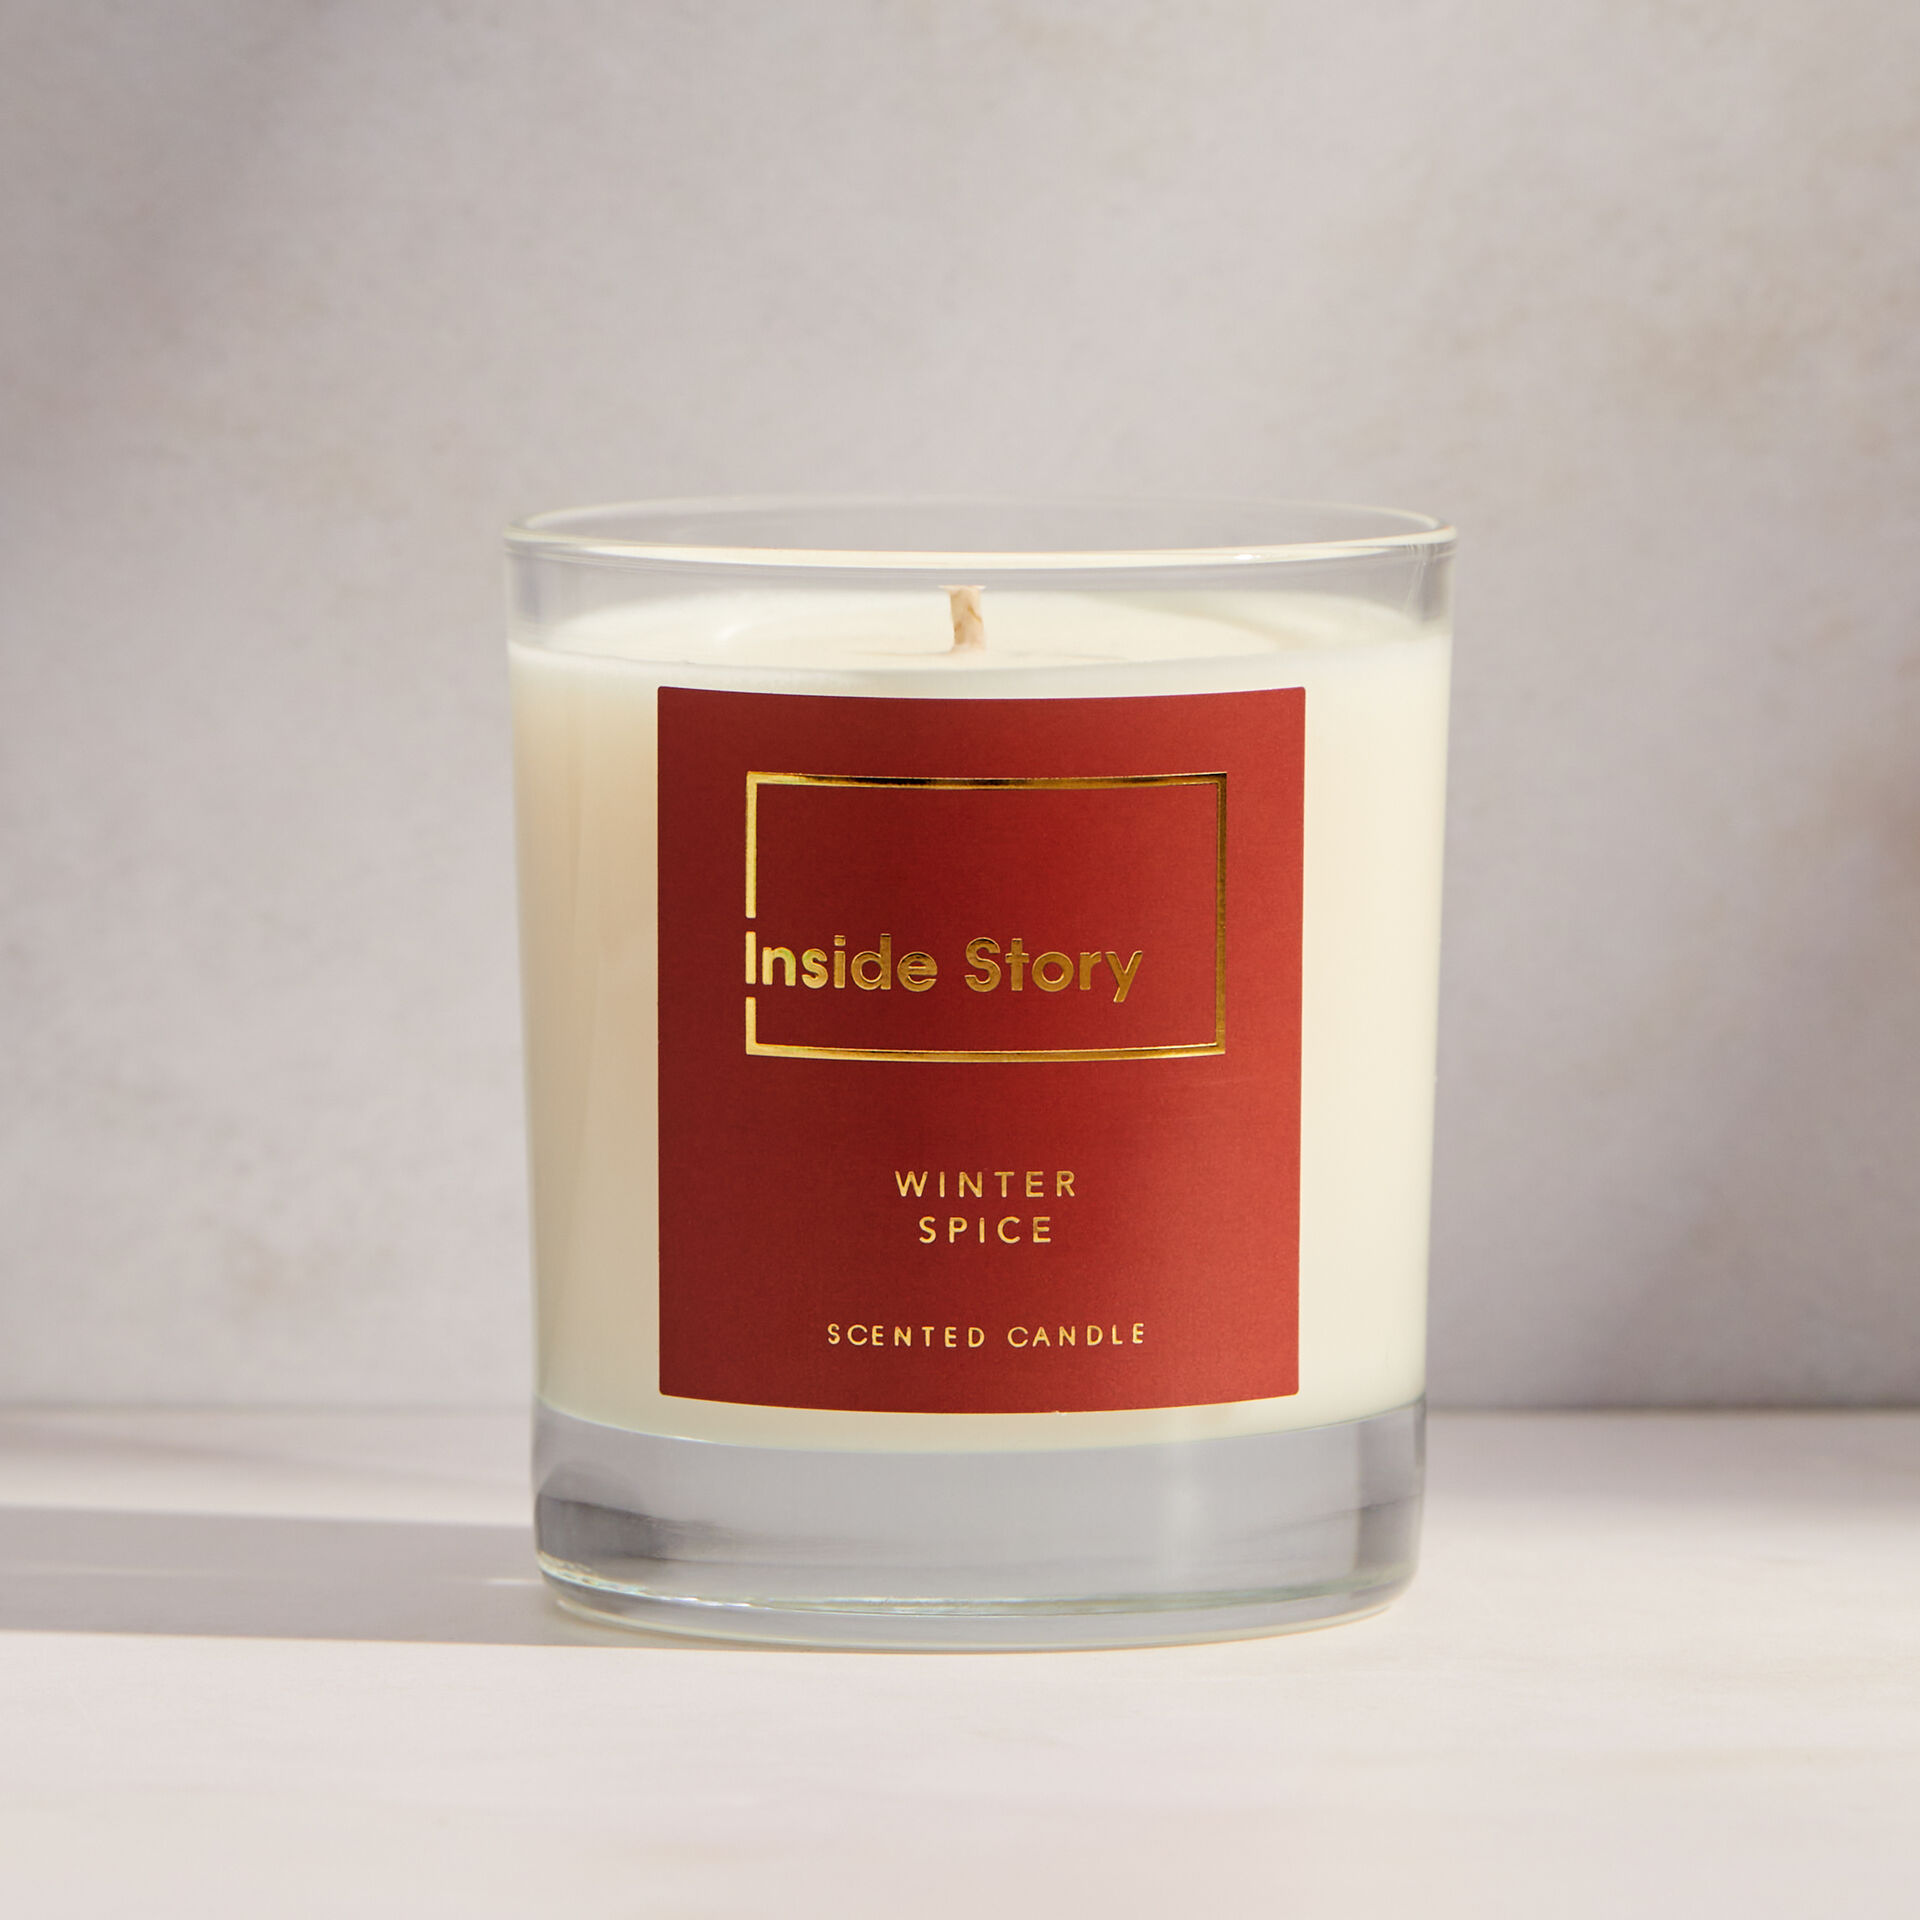 ${product-id}-Winter Spice Scented Signature Candle-Neutral-${view-type}